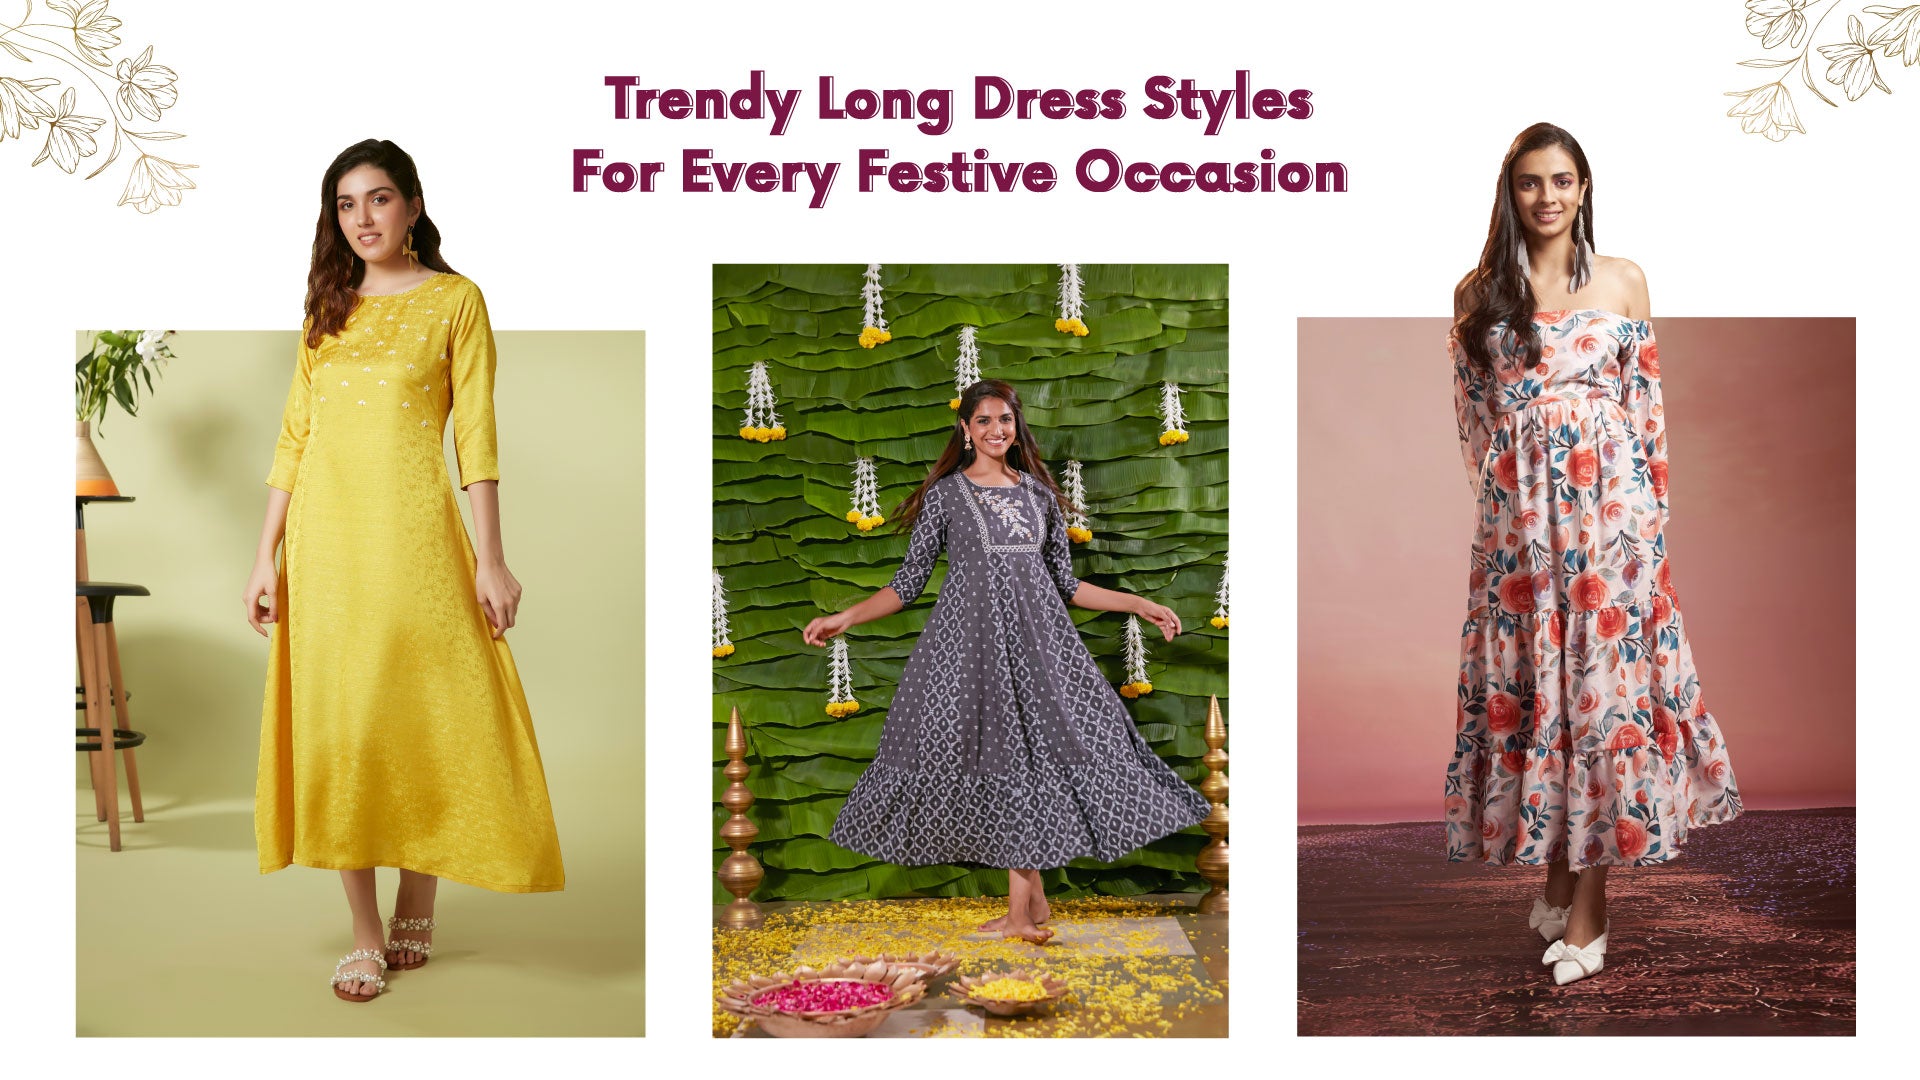 Trendy Long Dress Styles For Every Festive Occasion